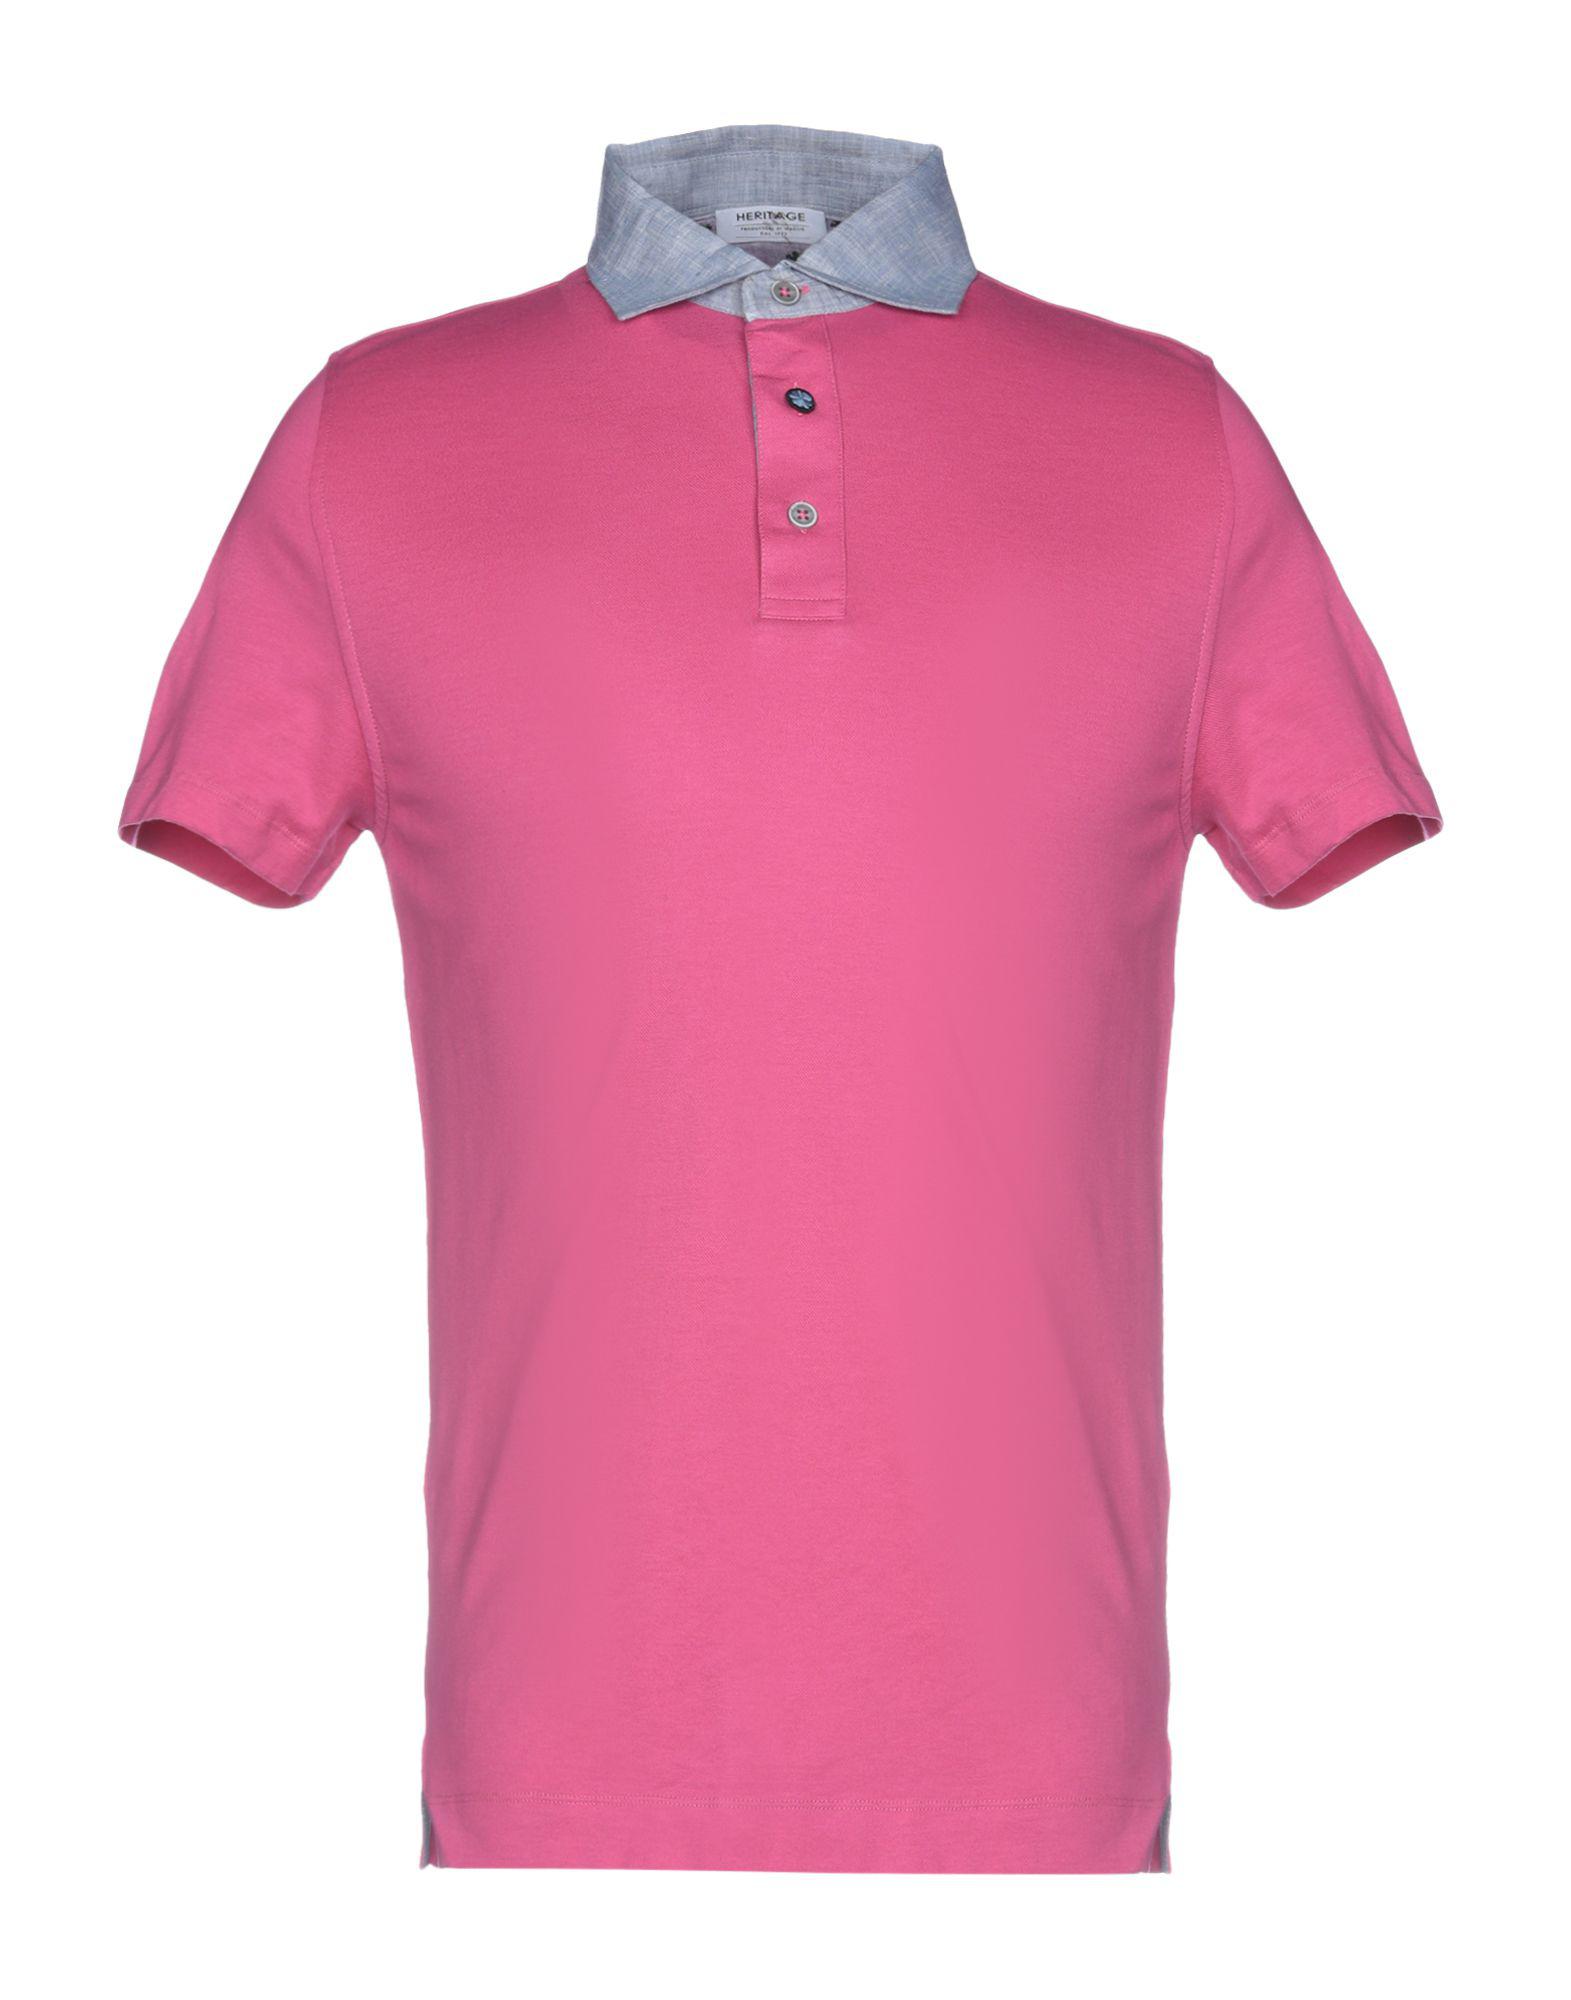 Heritage Cotton Polo Shirt in Fuchsia (Pink) for Men - Lyst